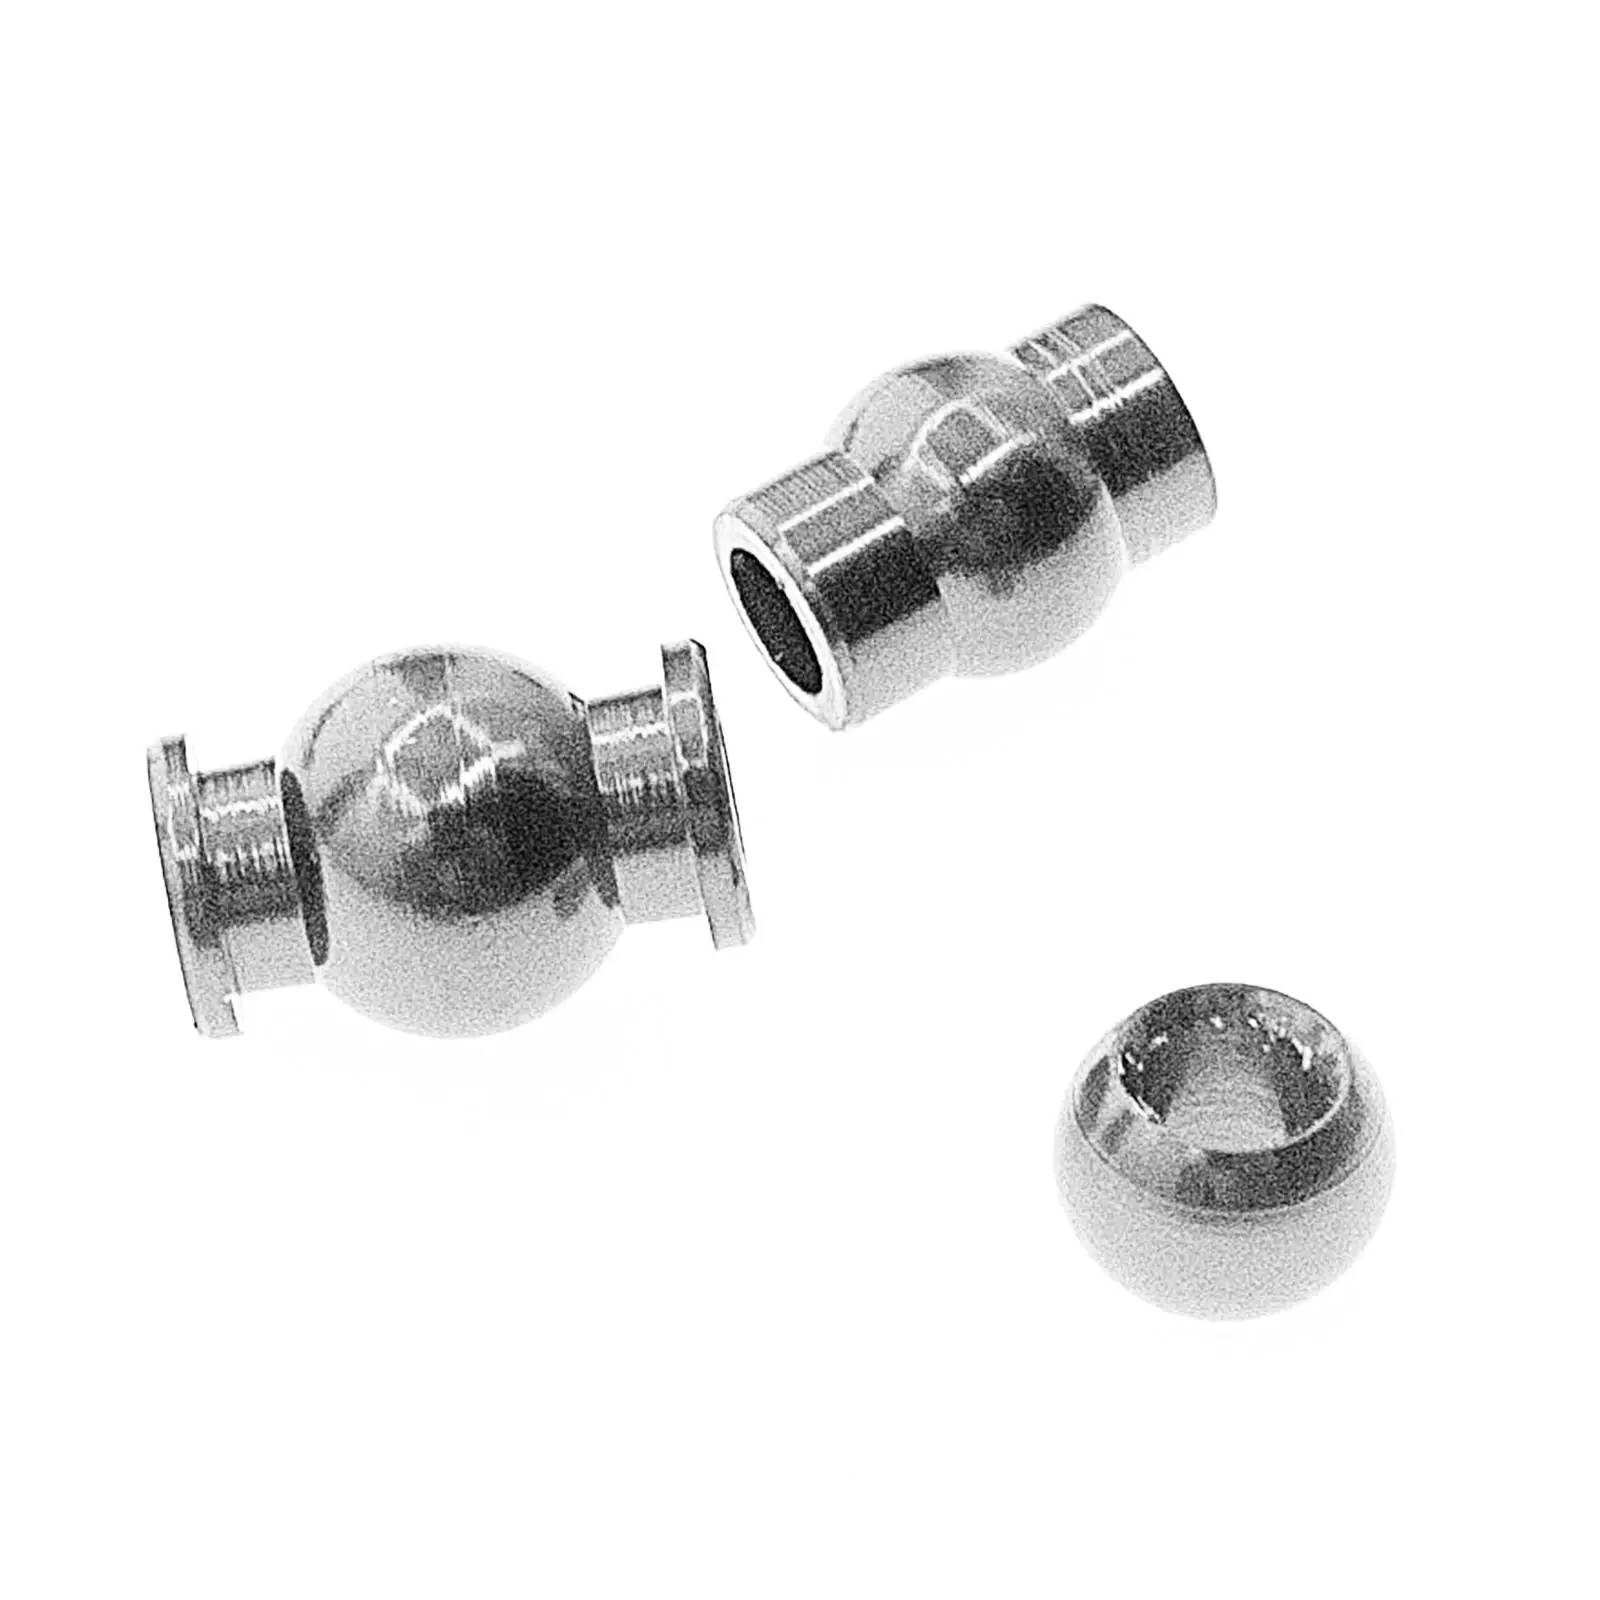 22 / Set RC Ball Head for Arrma Granite 4WD 1:10 RC Monster Truck Accessory